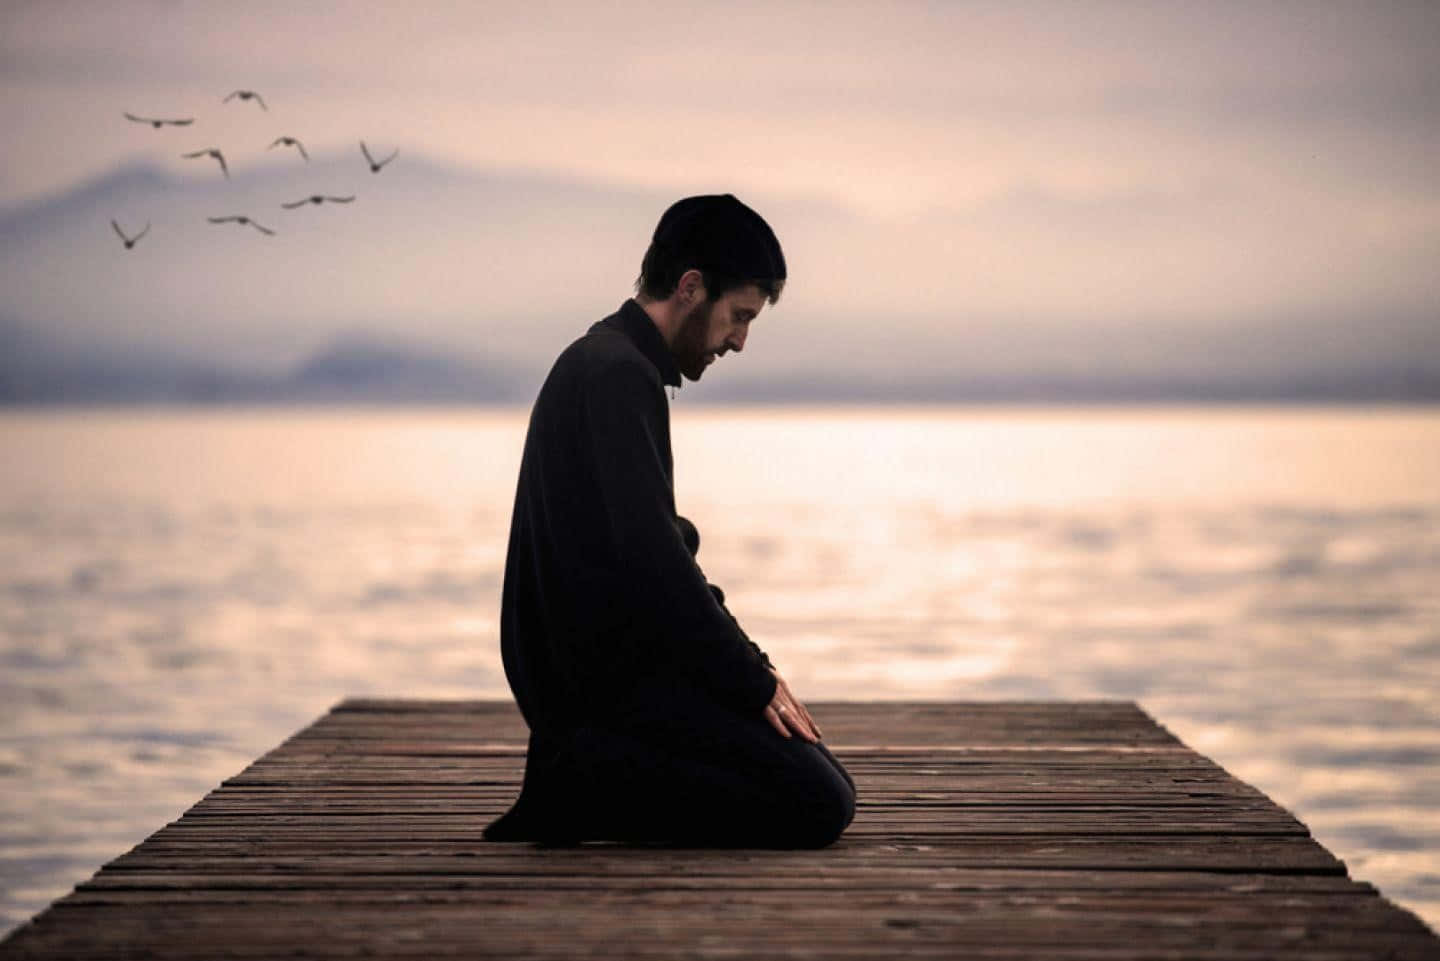 A person in deep prayer with hands clasped in front of a serene nature backdrop